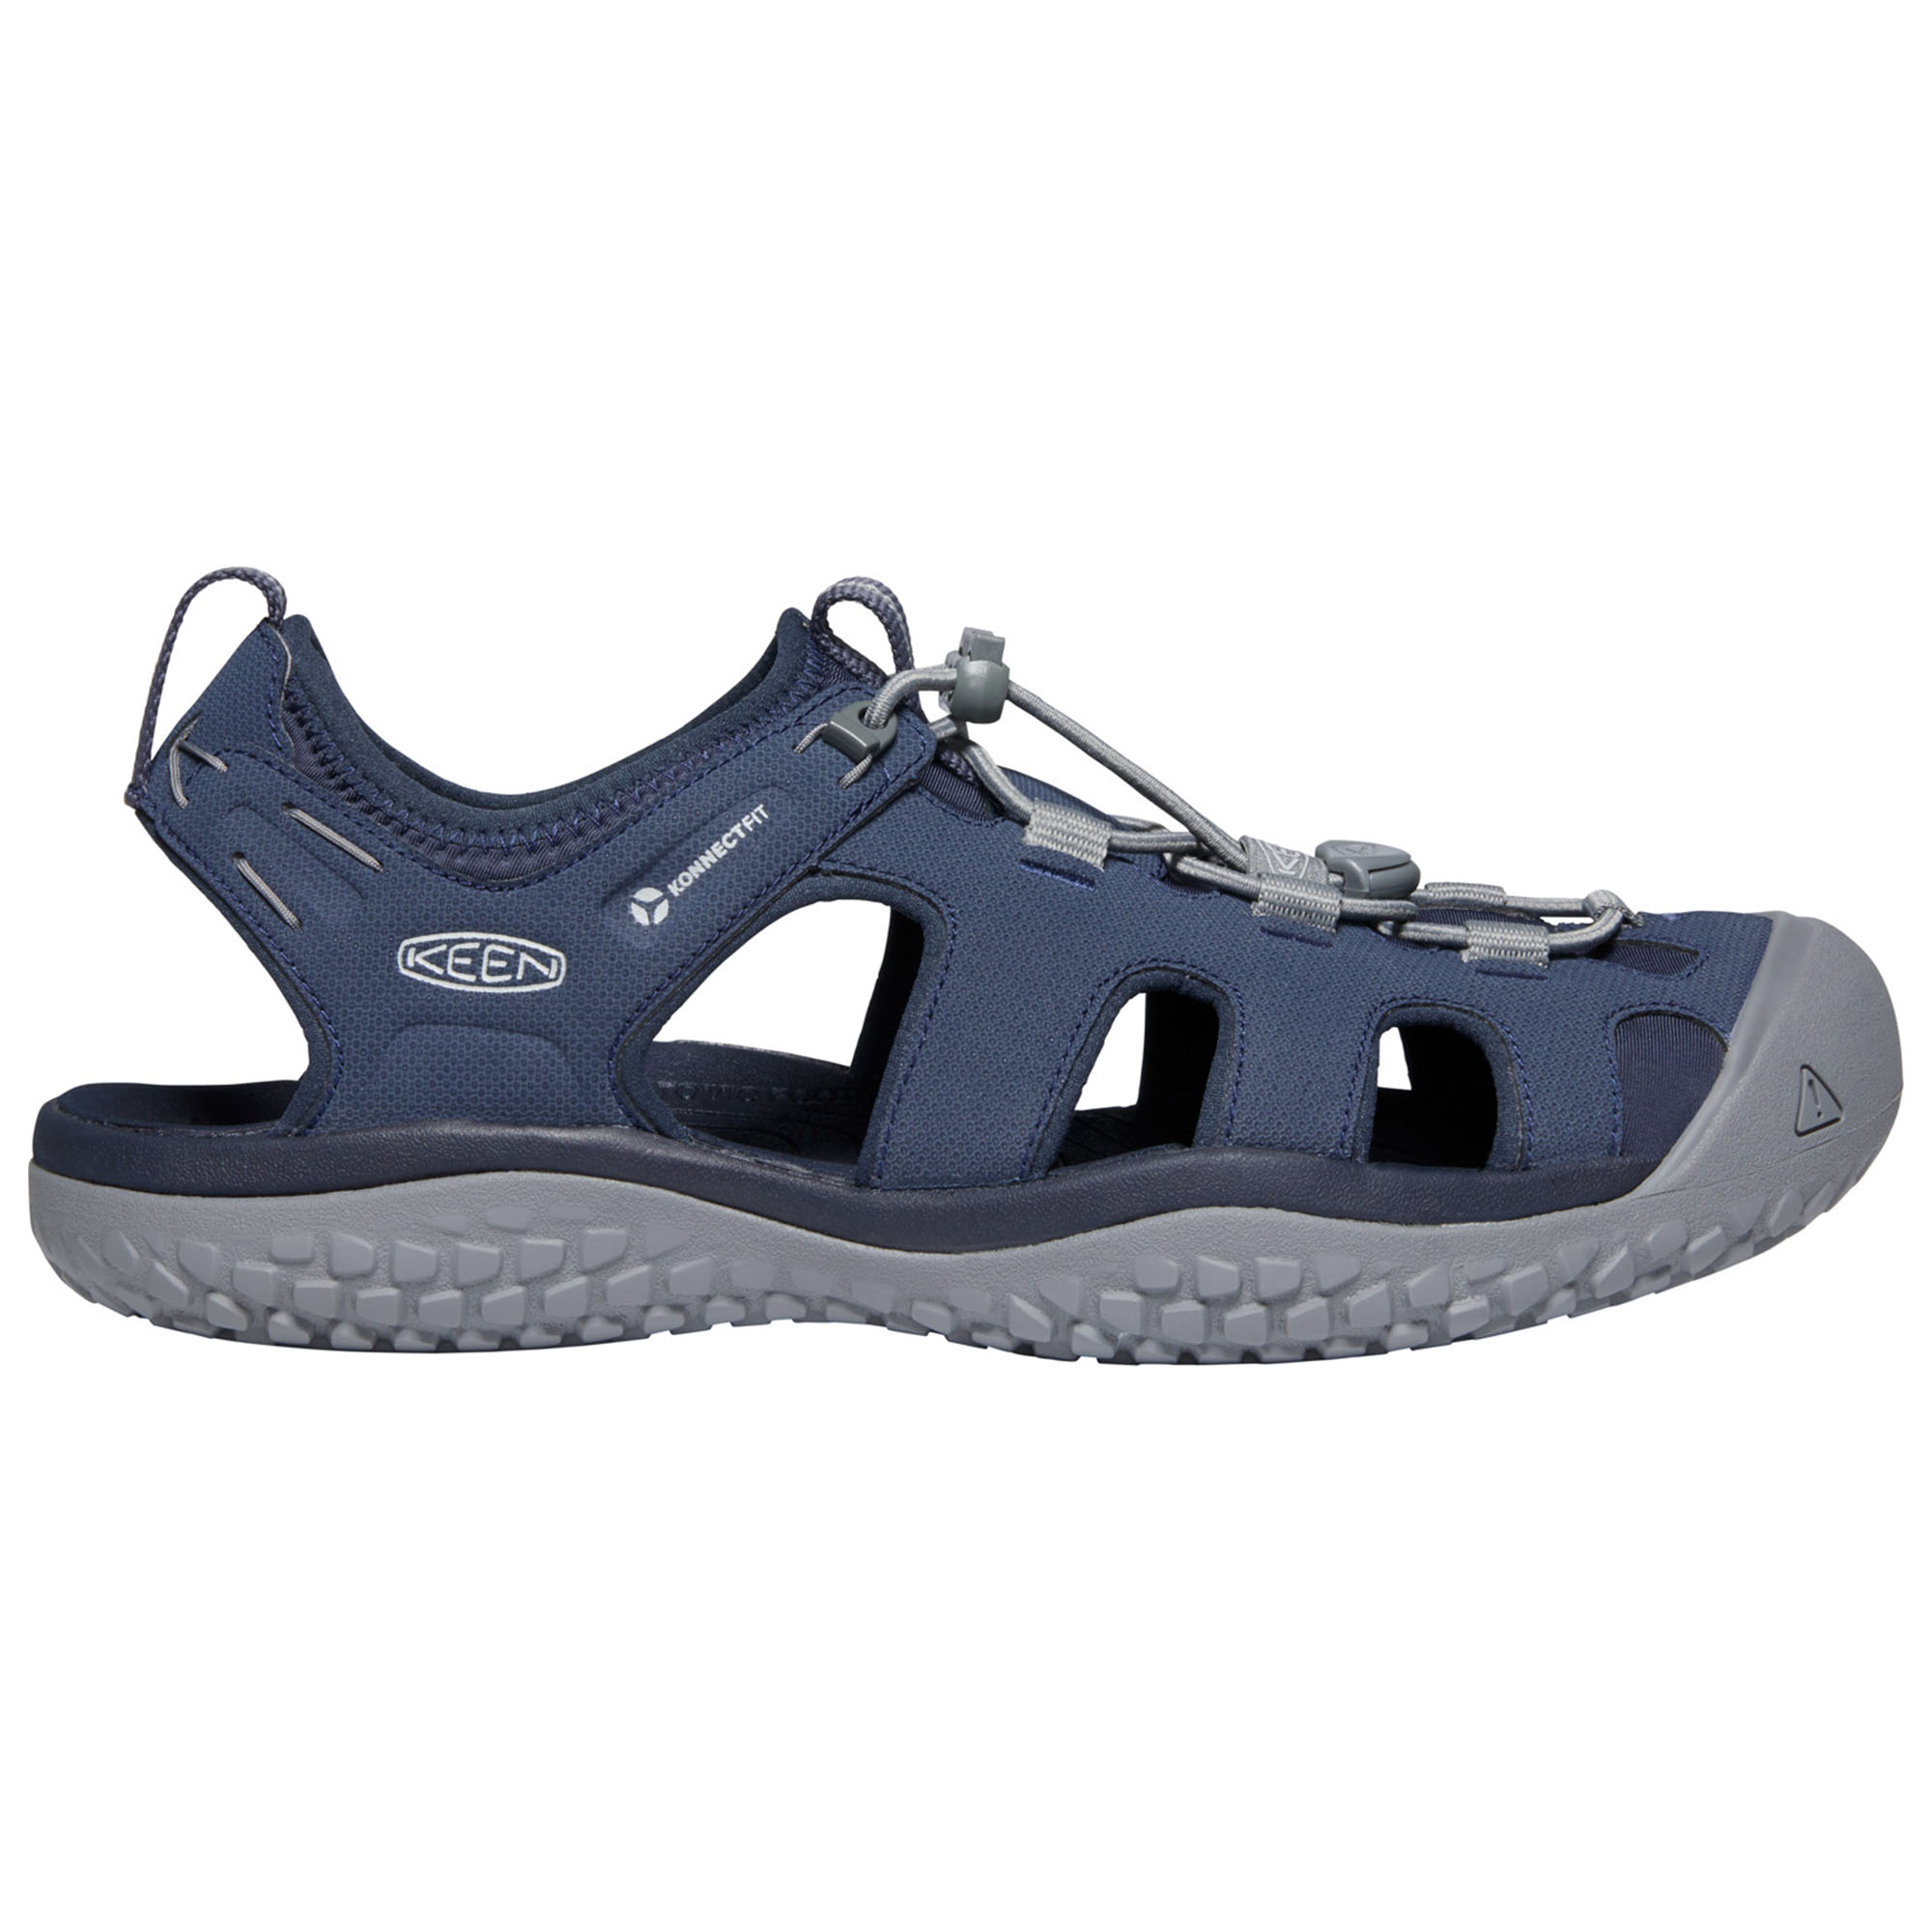 keen water shoes clearance